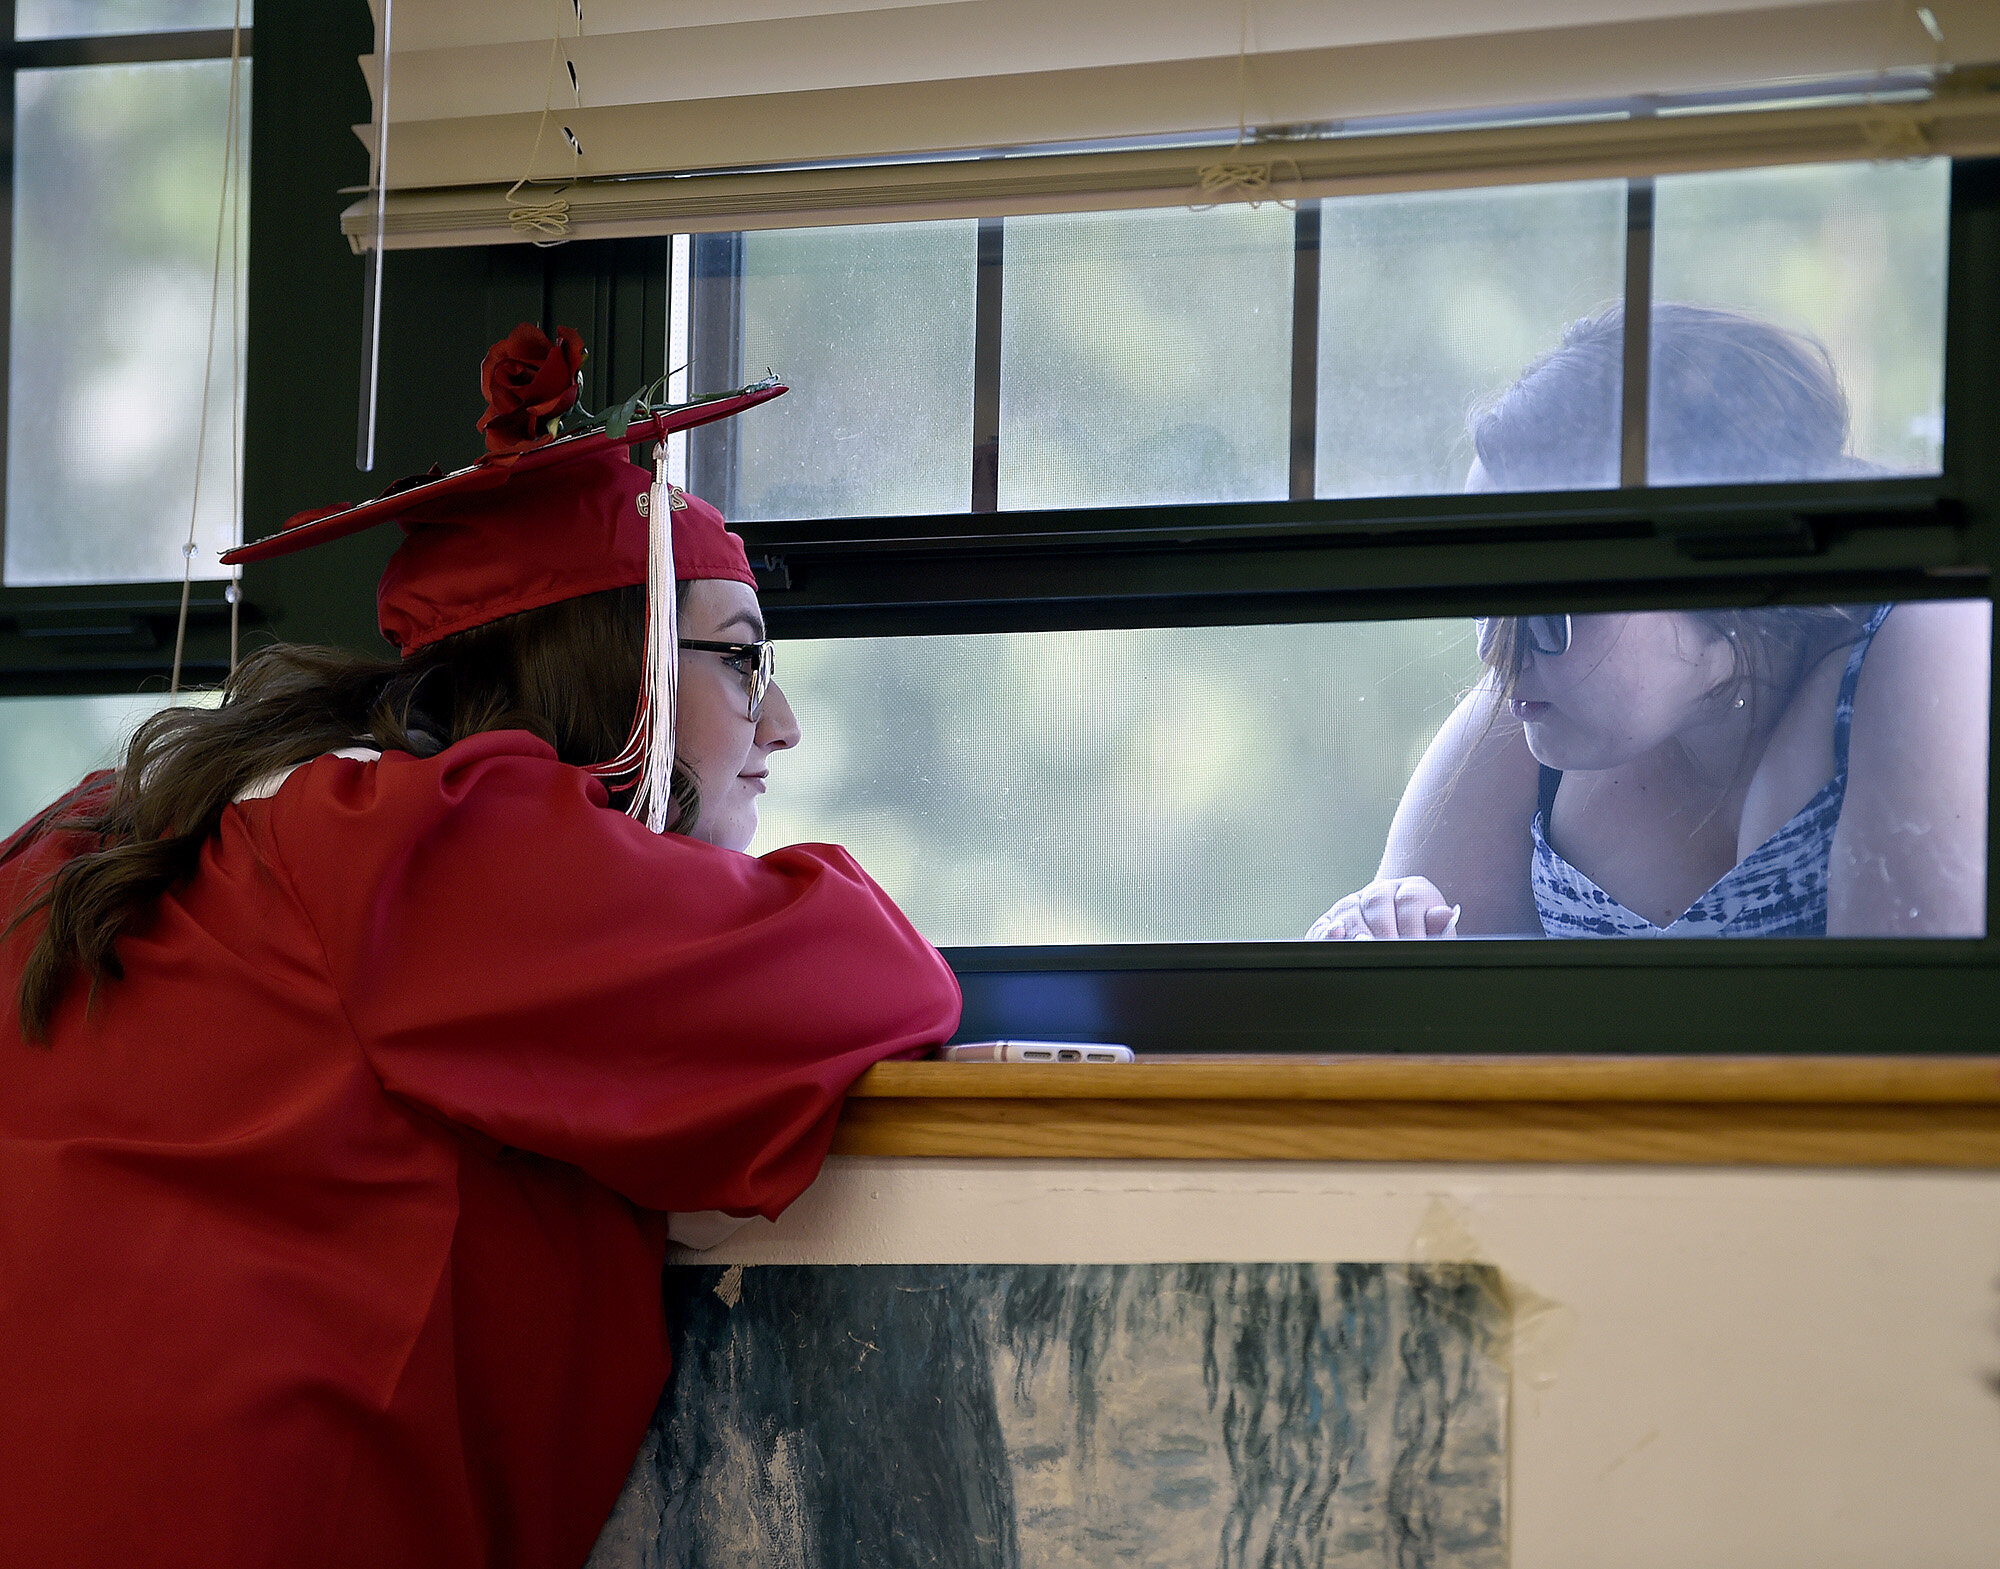  Graduate Abby Bargnesi, left, talks to her sister Taylor through a window before Norwich Free Academy's Commencement Ceremony on Wednesday, June 12, 2019. (The Day)  